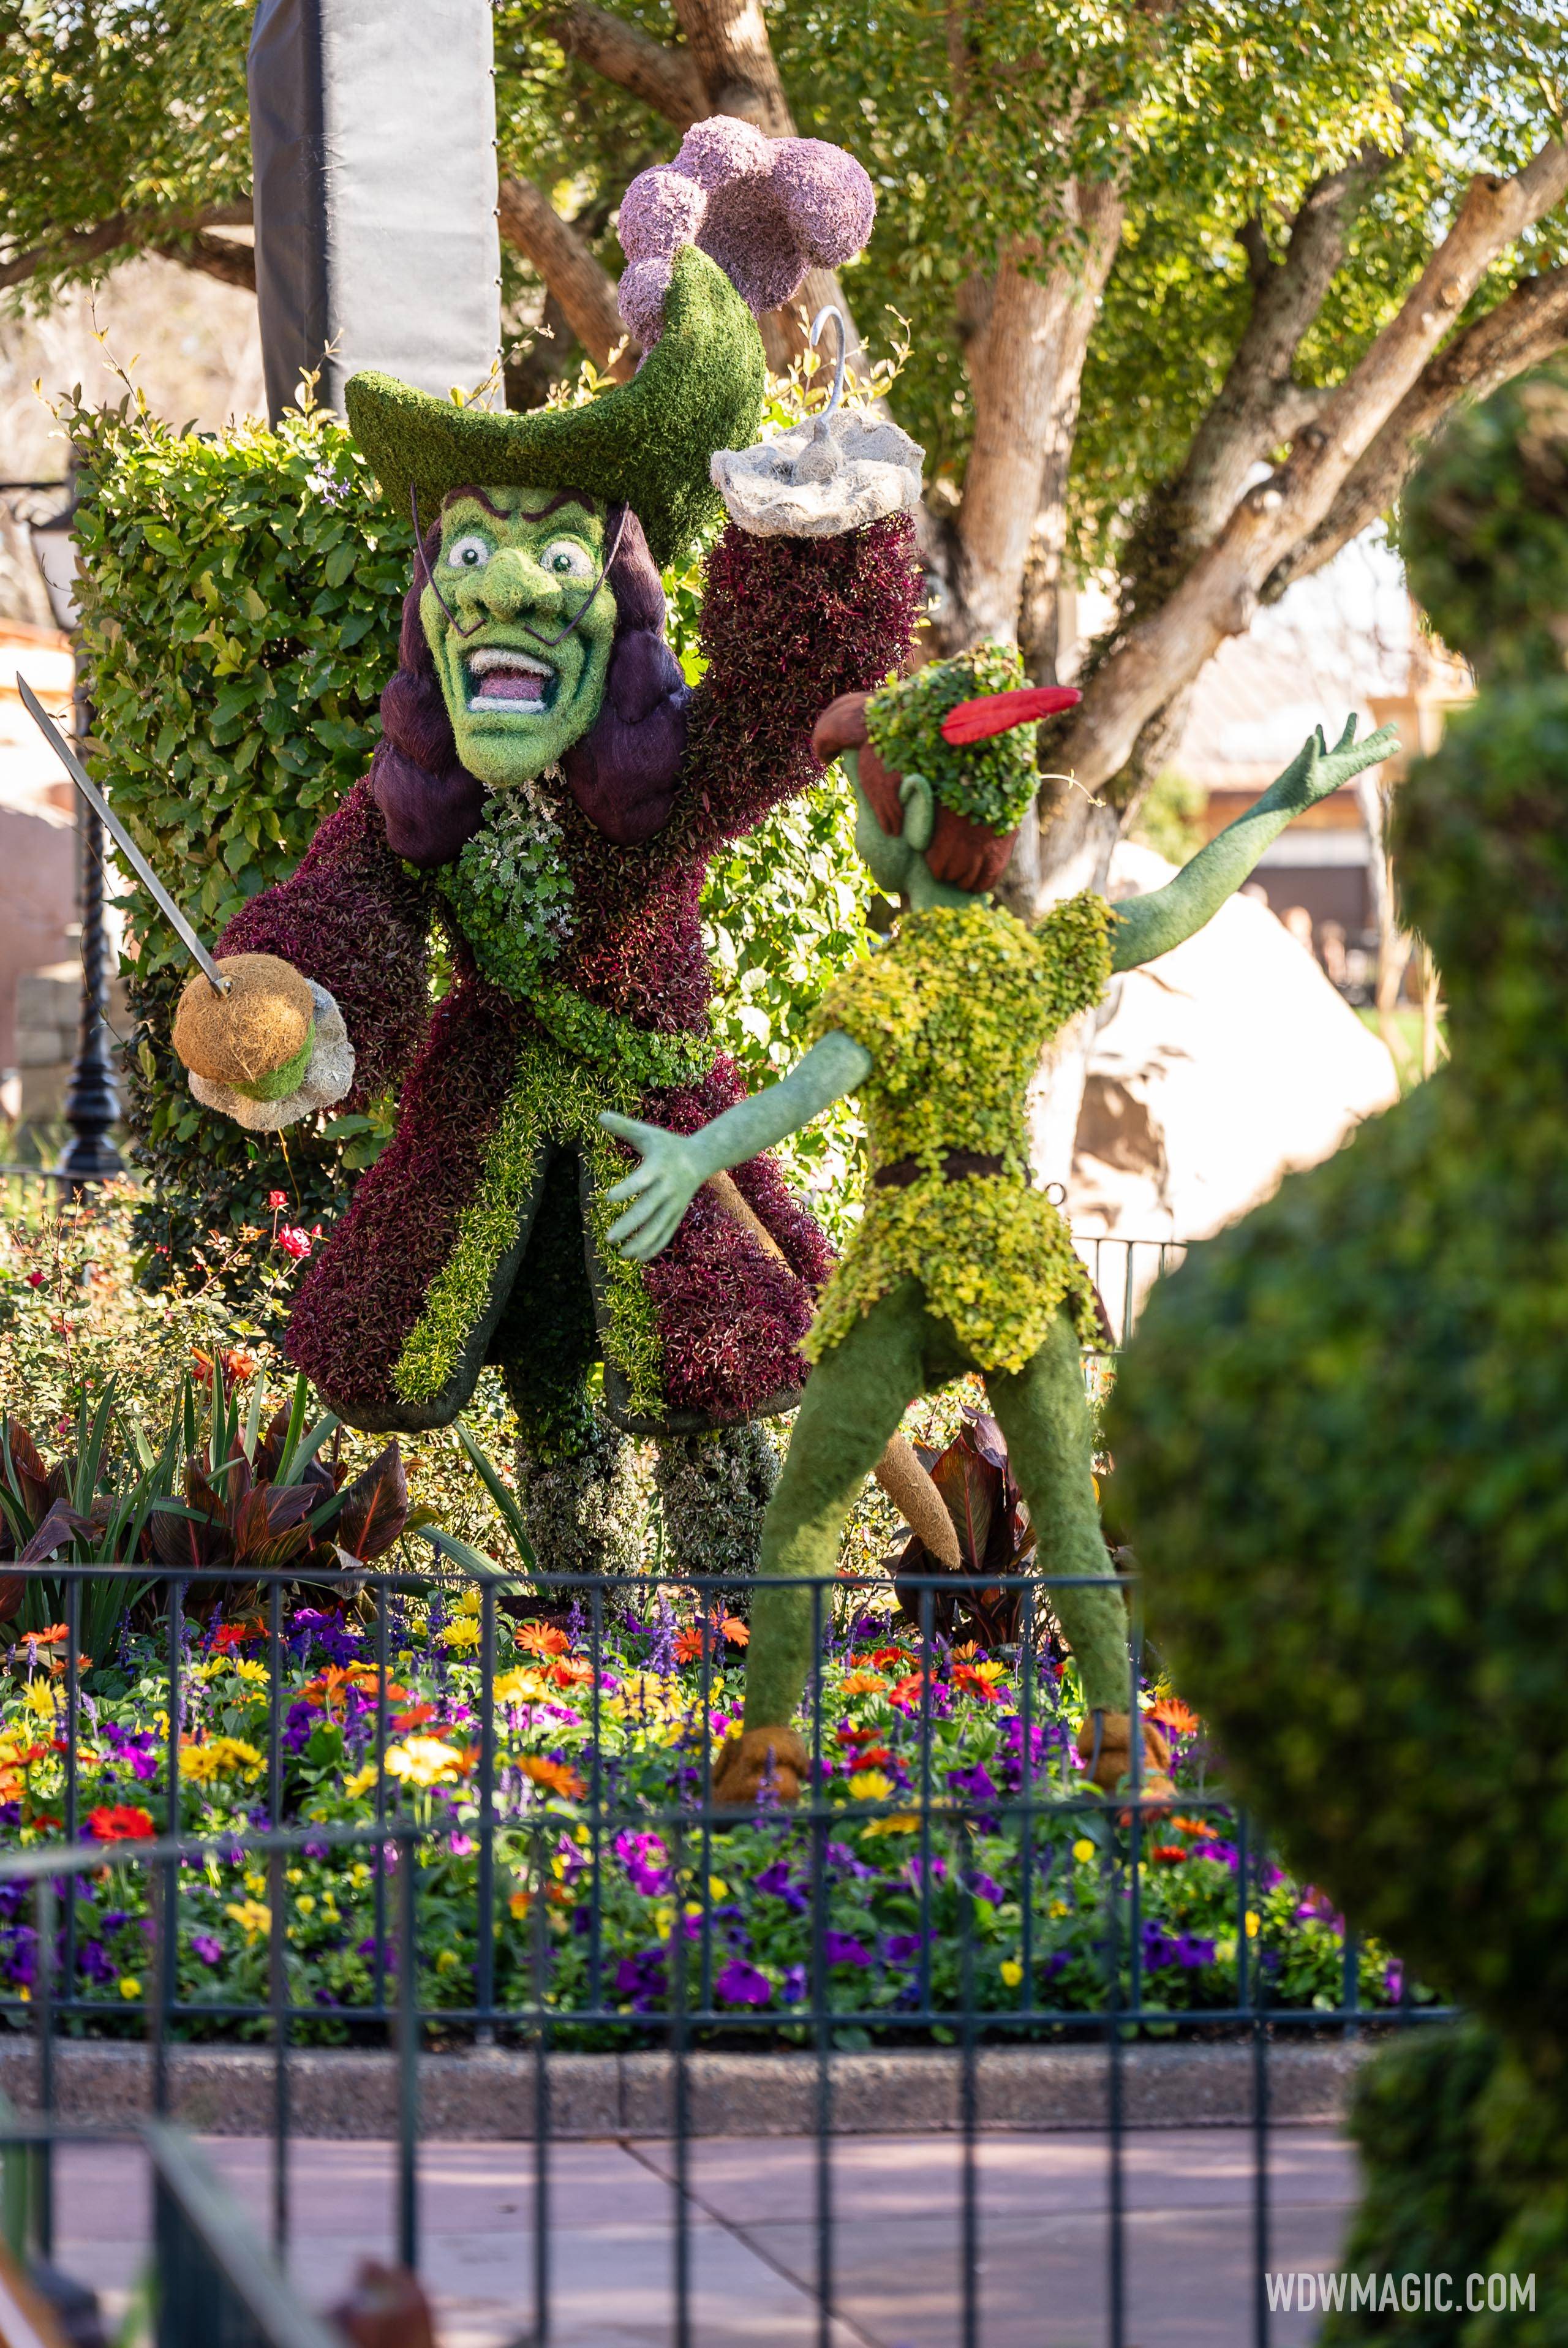 Peter Pan, Captain Hook and Tick Tock Croc, World Showcase – Between United Kingdom and Canada Pavilions